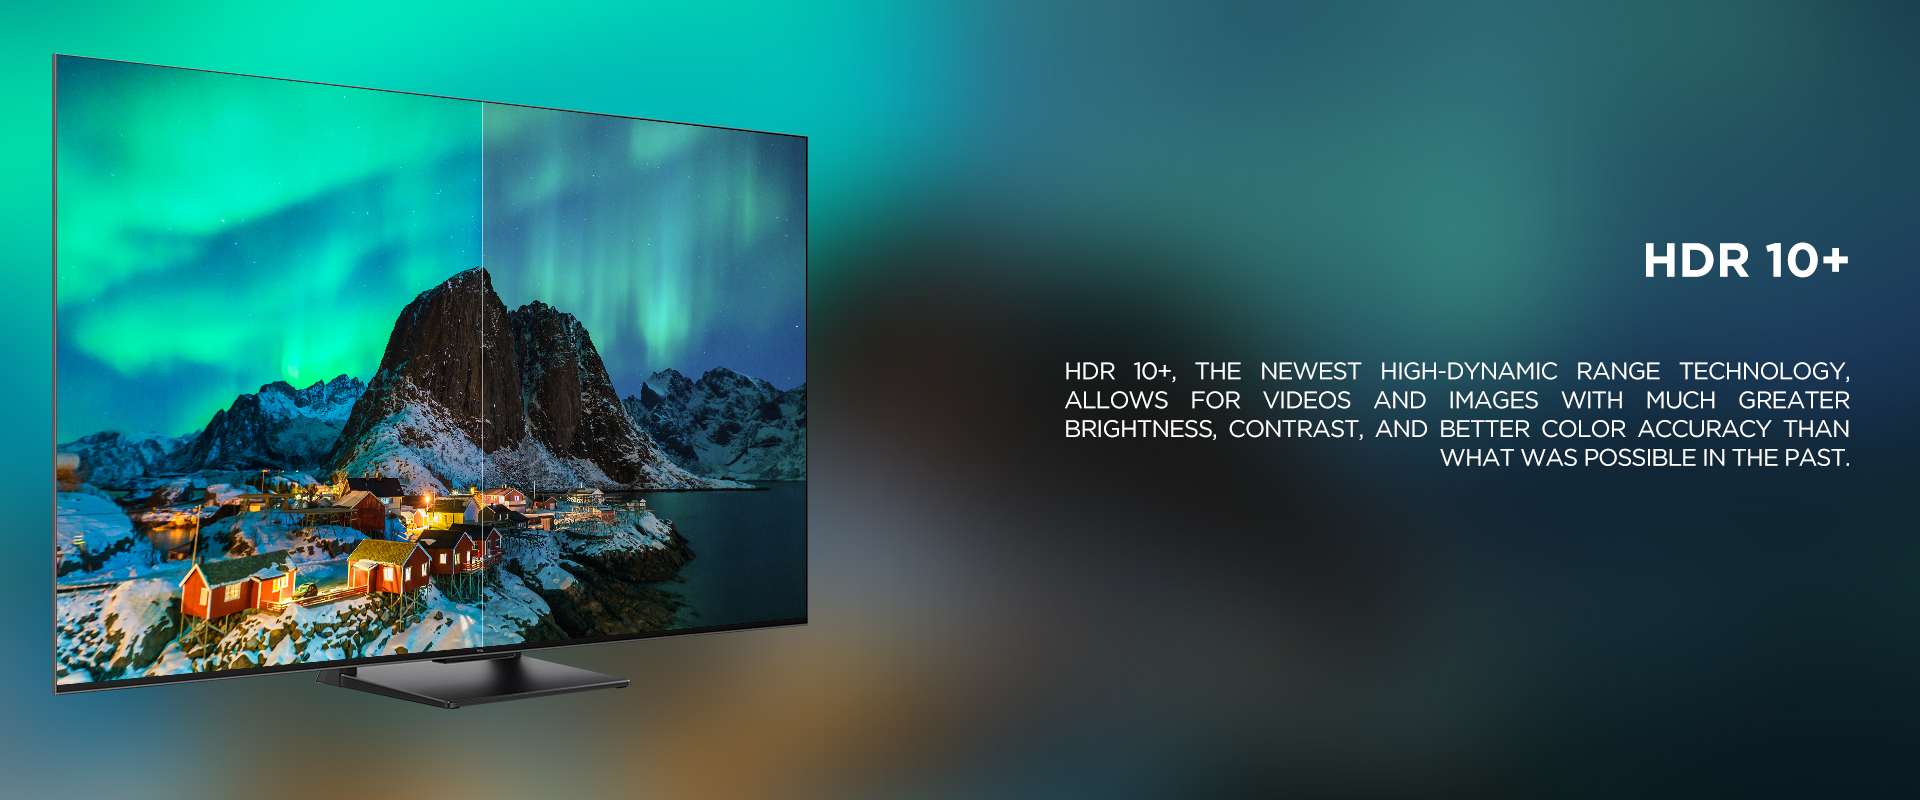 HDR 10+ - HDR 10+, the newest high-dynamic range technology, allows for videos and images with much greater brightness, contrast, and better color accuracy than what was possible in the past. 
